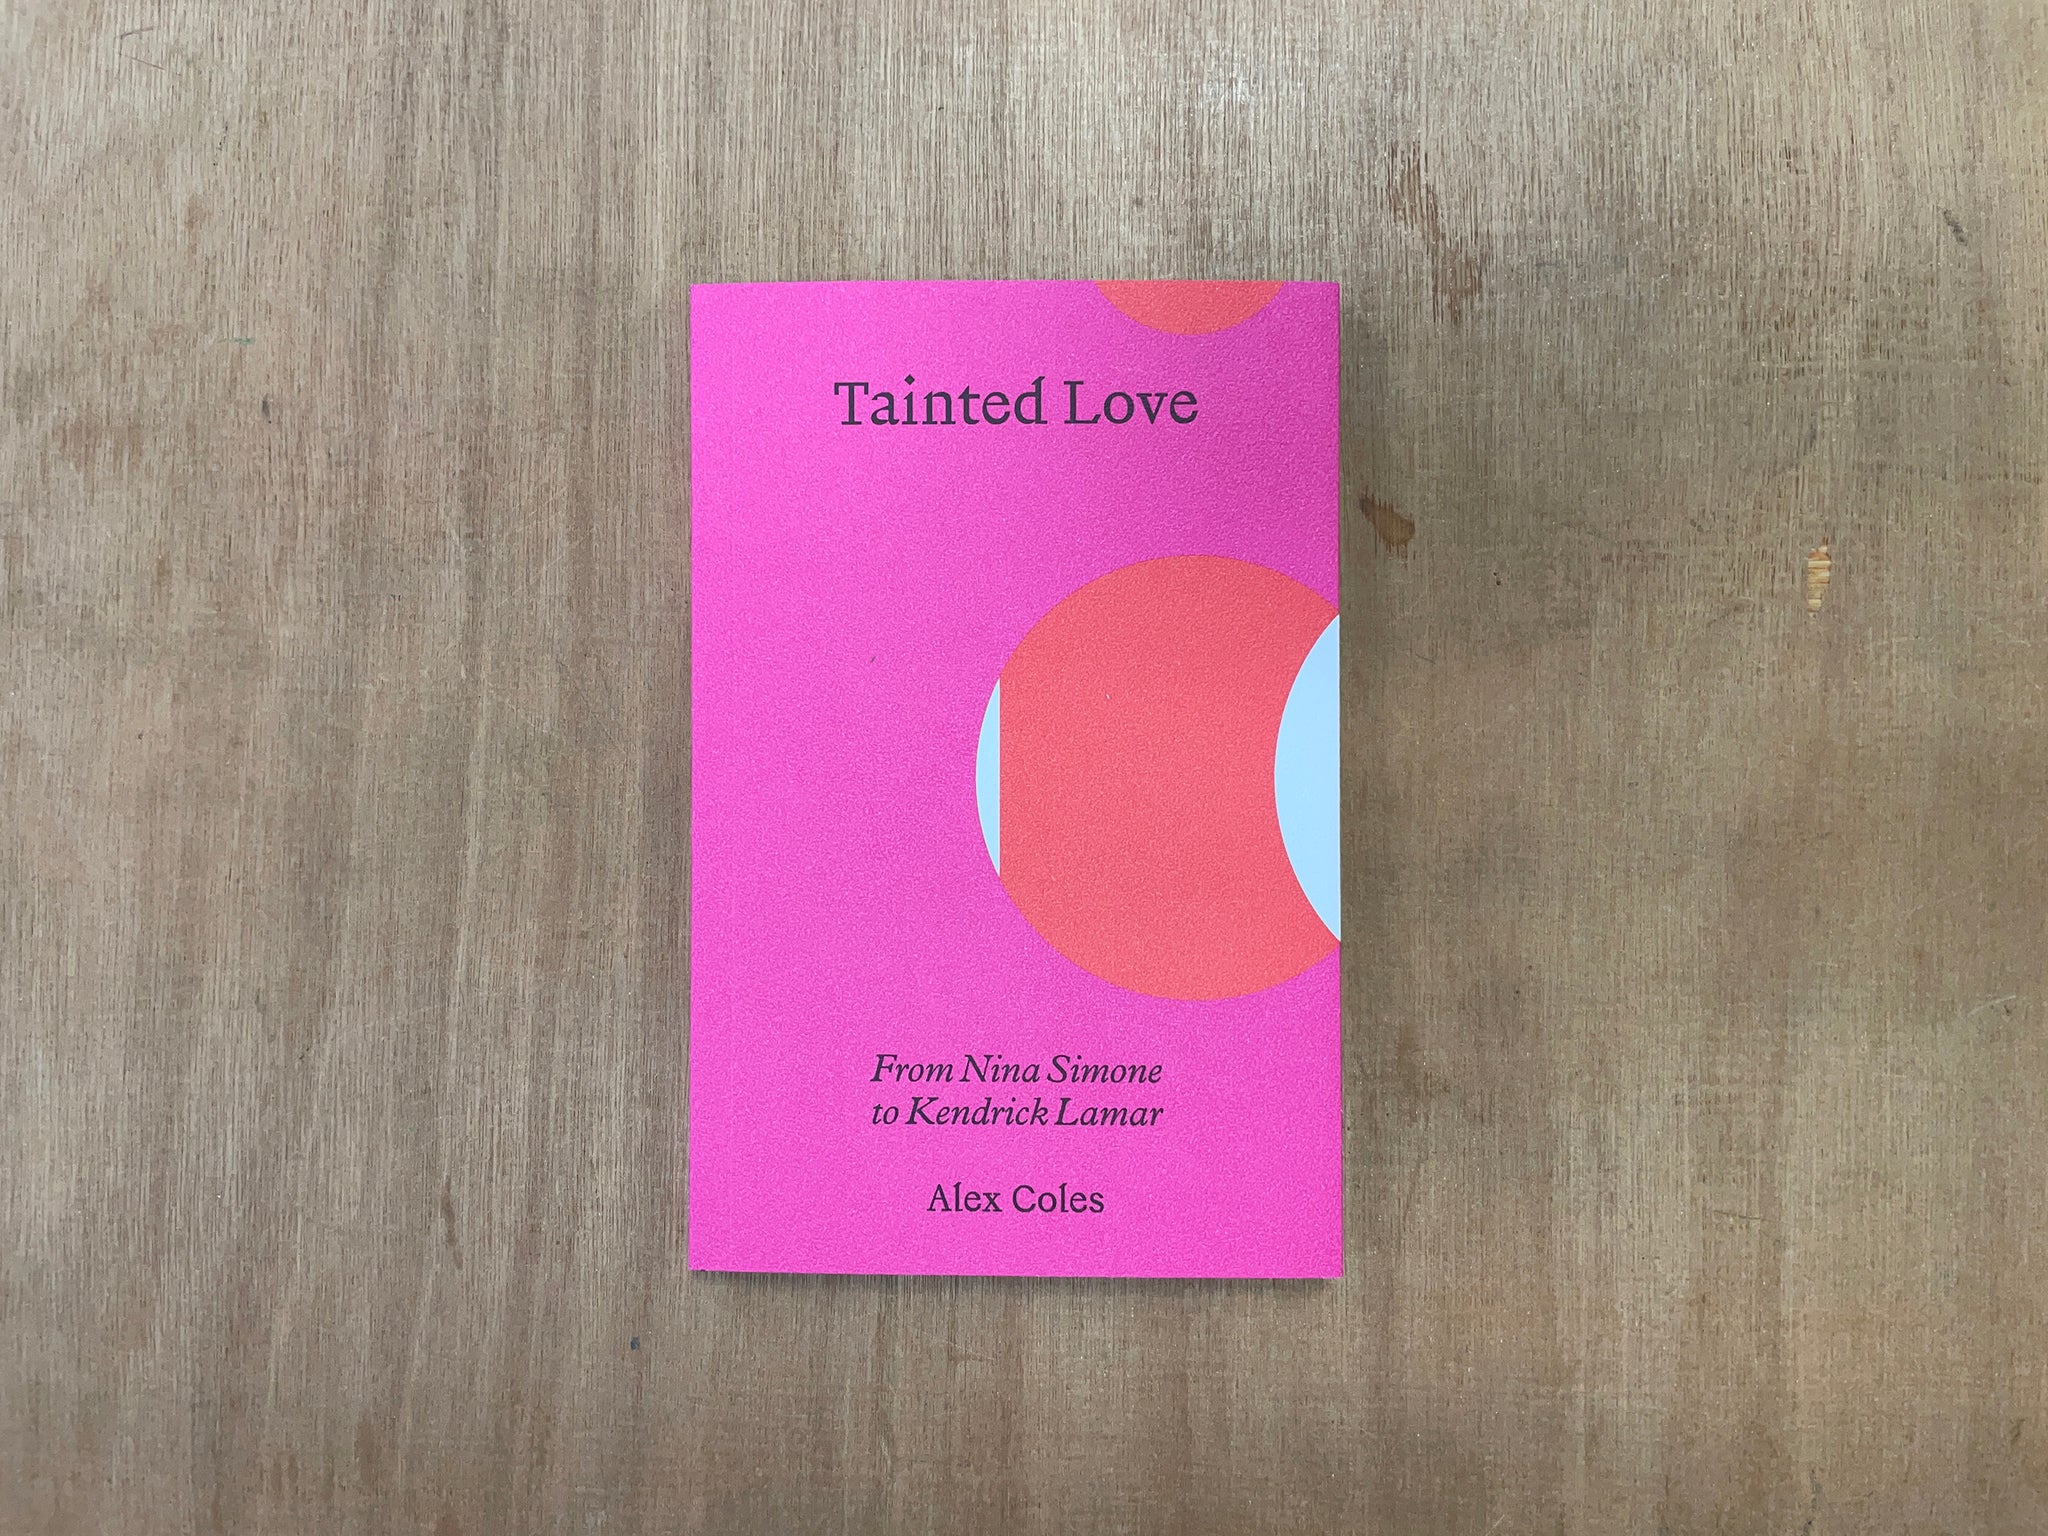 TAINTED LOVE: FROM NINA SIMONE TO KENDRICK LAMAR by Alex Coles